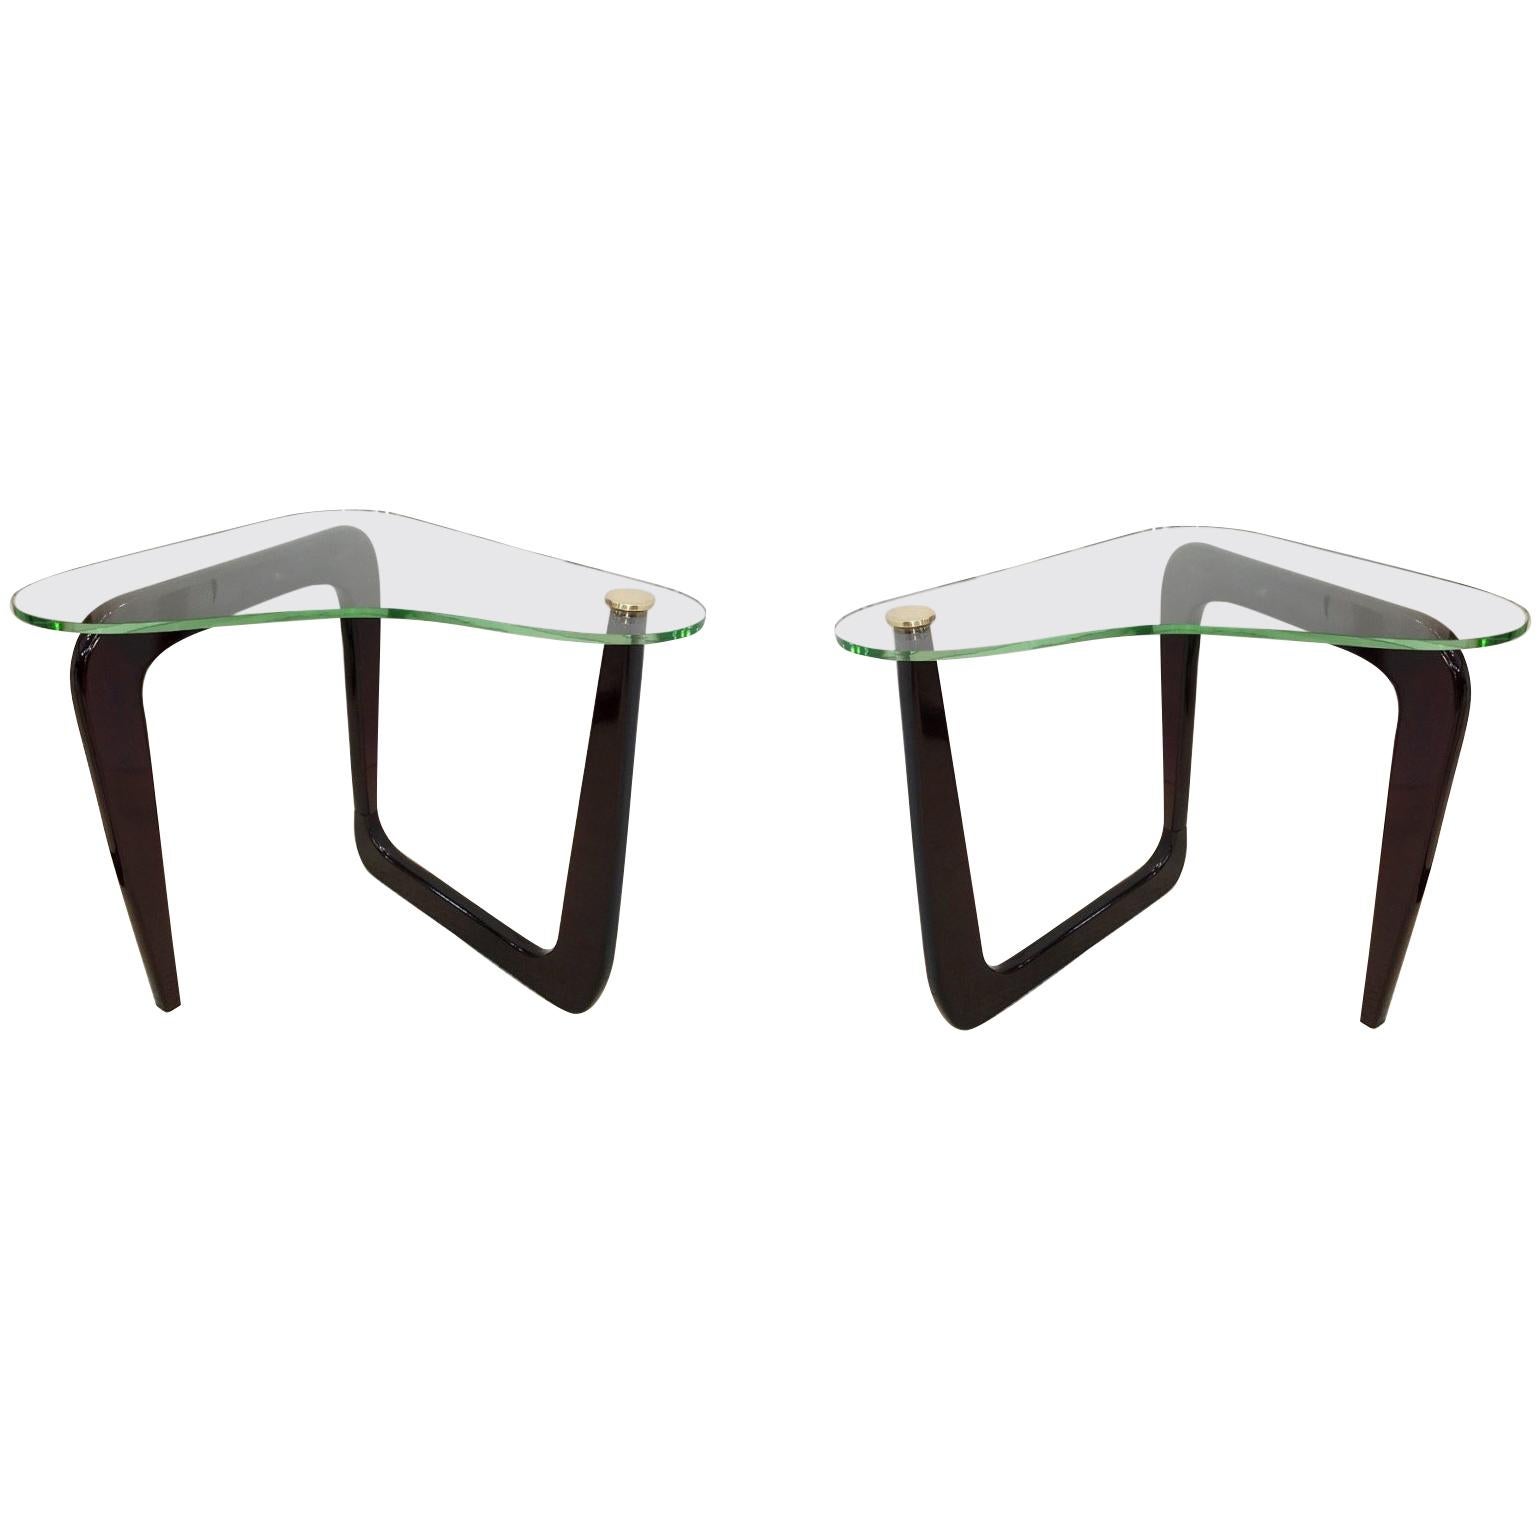 Pair of Noguchi Style Modernist End Tables